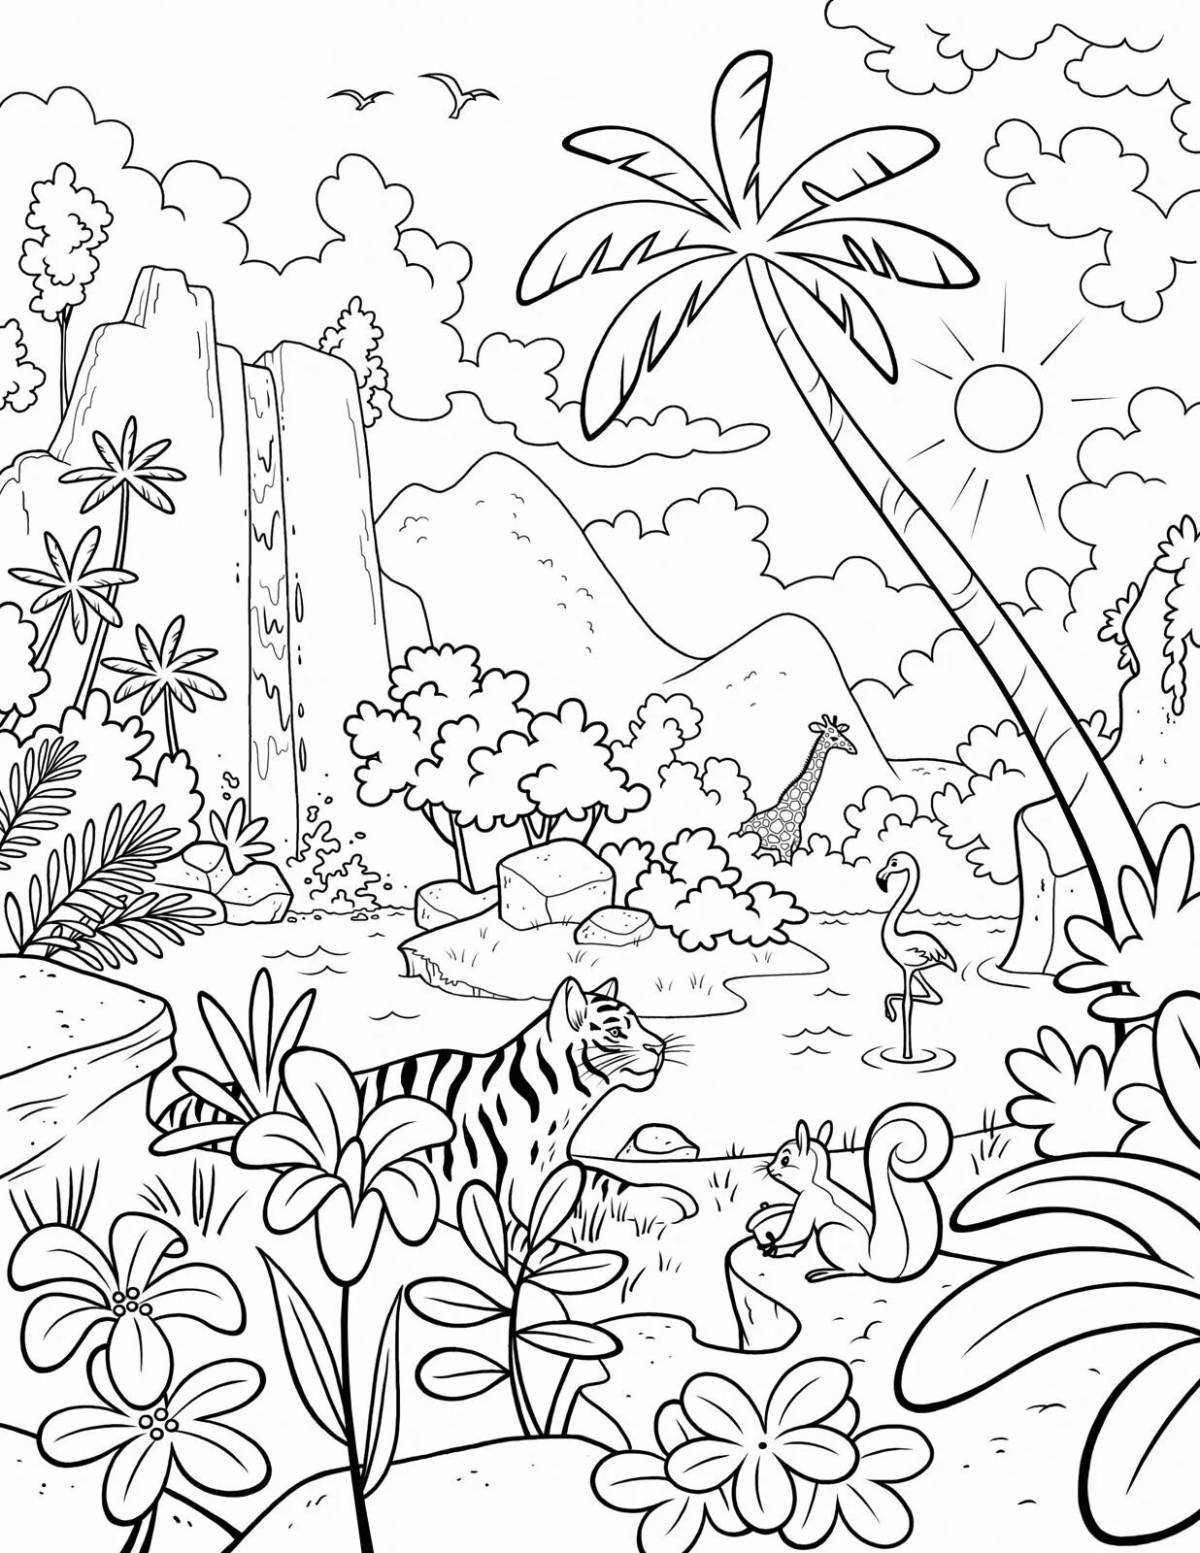 Adorable nature coloring book for 10 year olds